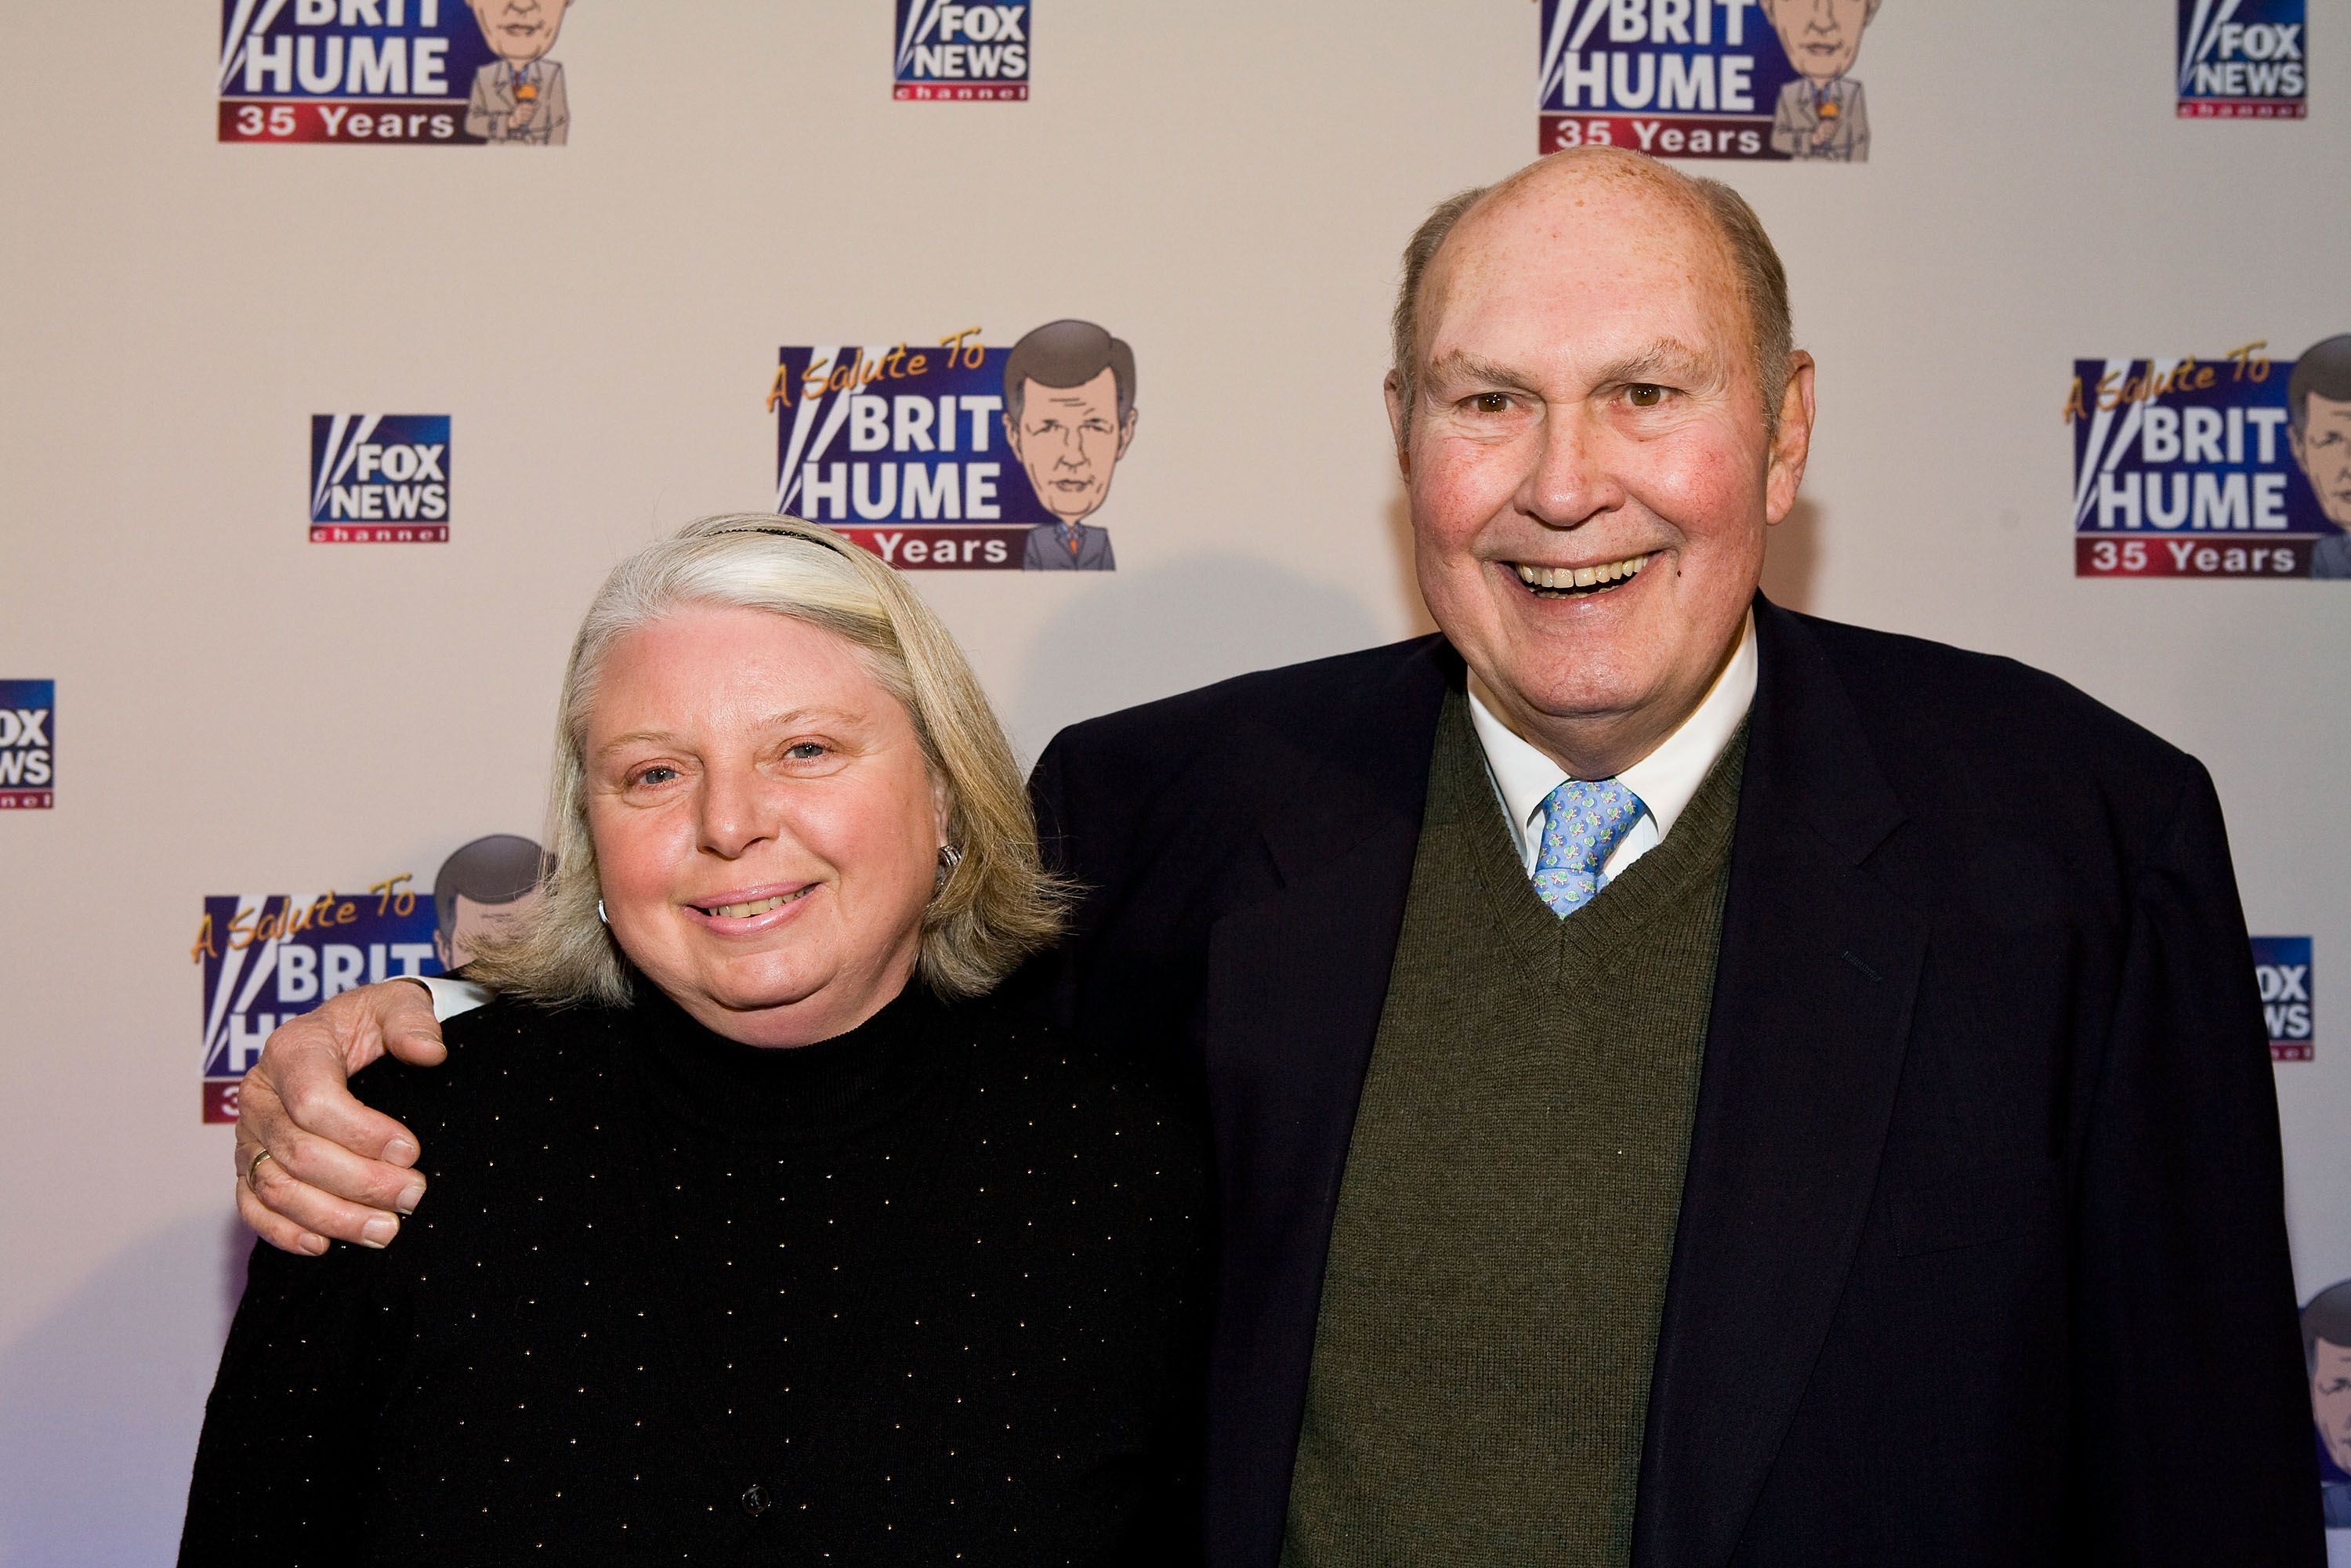 Paris Keenan and Willard Scott during the salute to Brit Hume at Cafe Milano on January 8, 2009, in Washington, DC. | Source: Getty Images